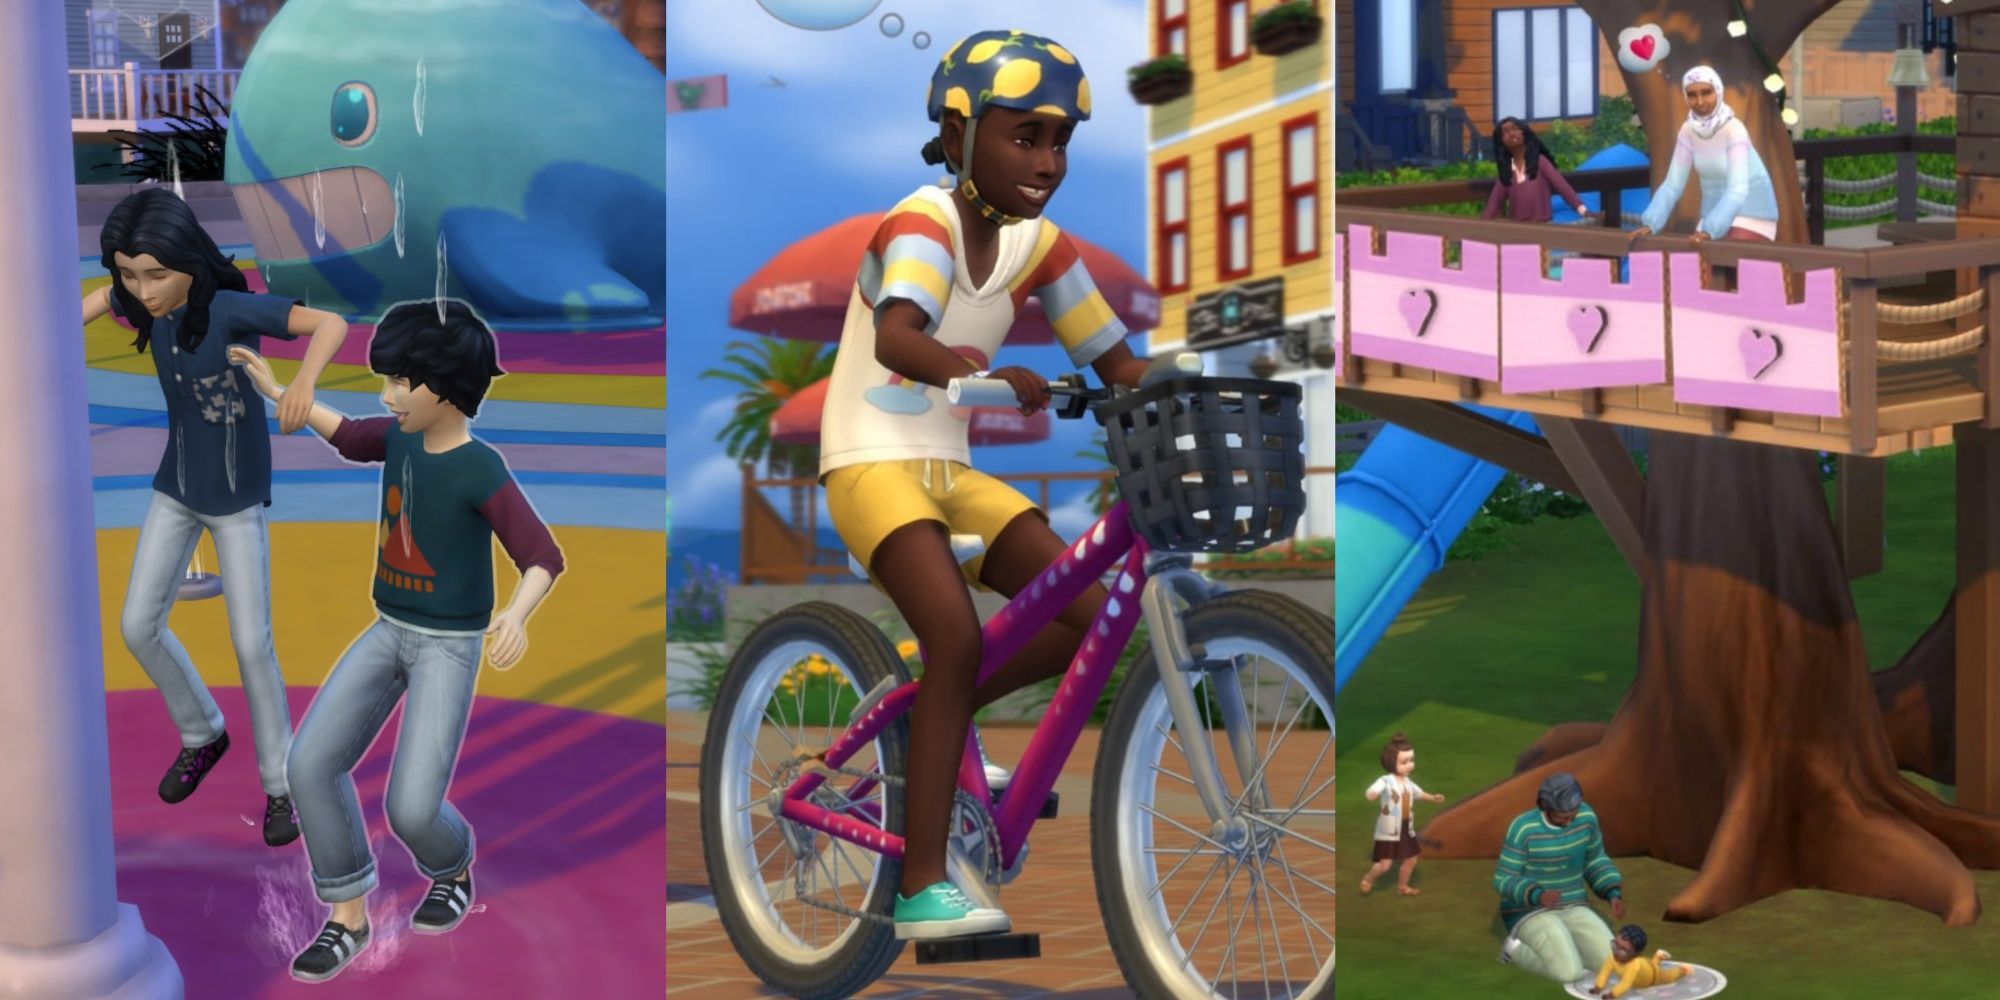 The Sims 4 Growing Together - Collage - Two sim children playing in splash pad on left, sim child learning to ride bike in center, and family in treehouse on right